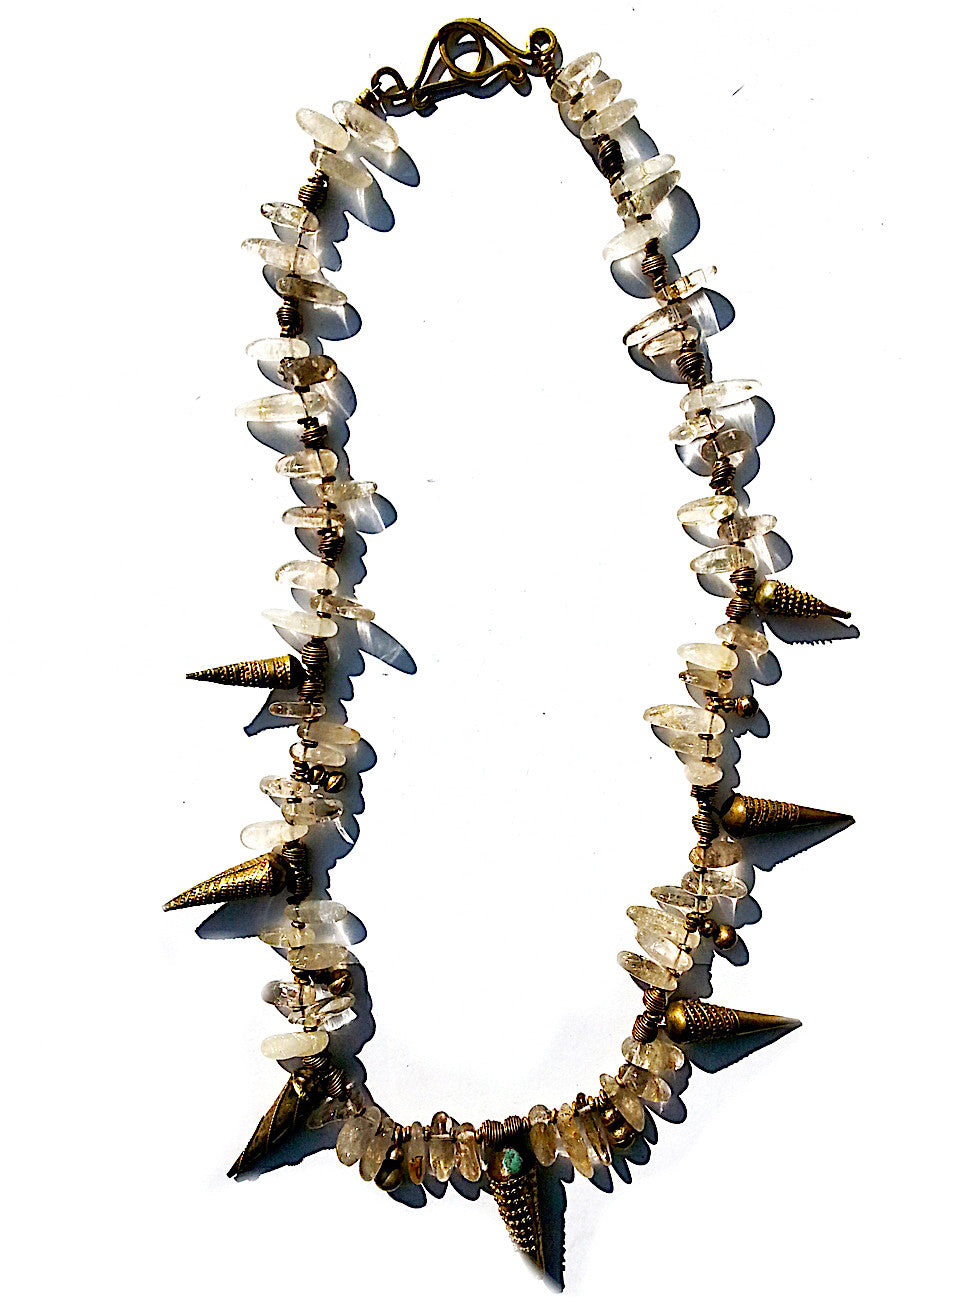 Necklace Rutillated Quartz Citrine and African Spike Charms